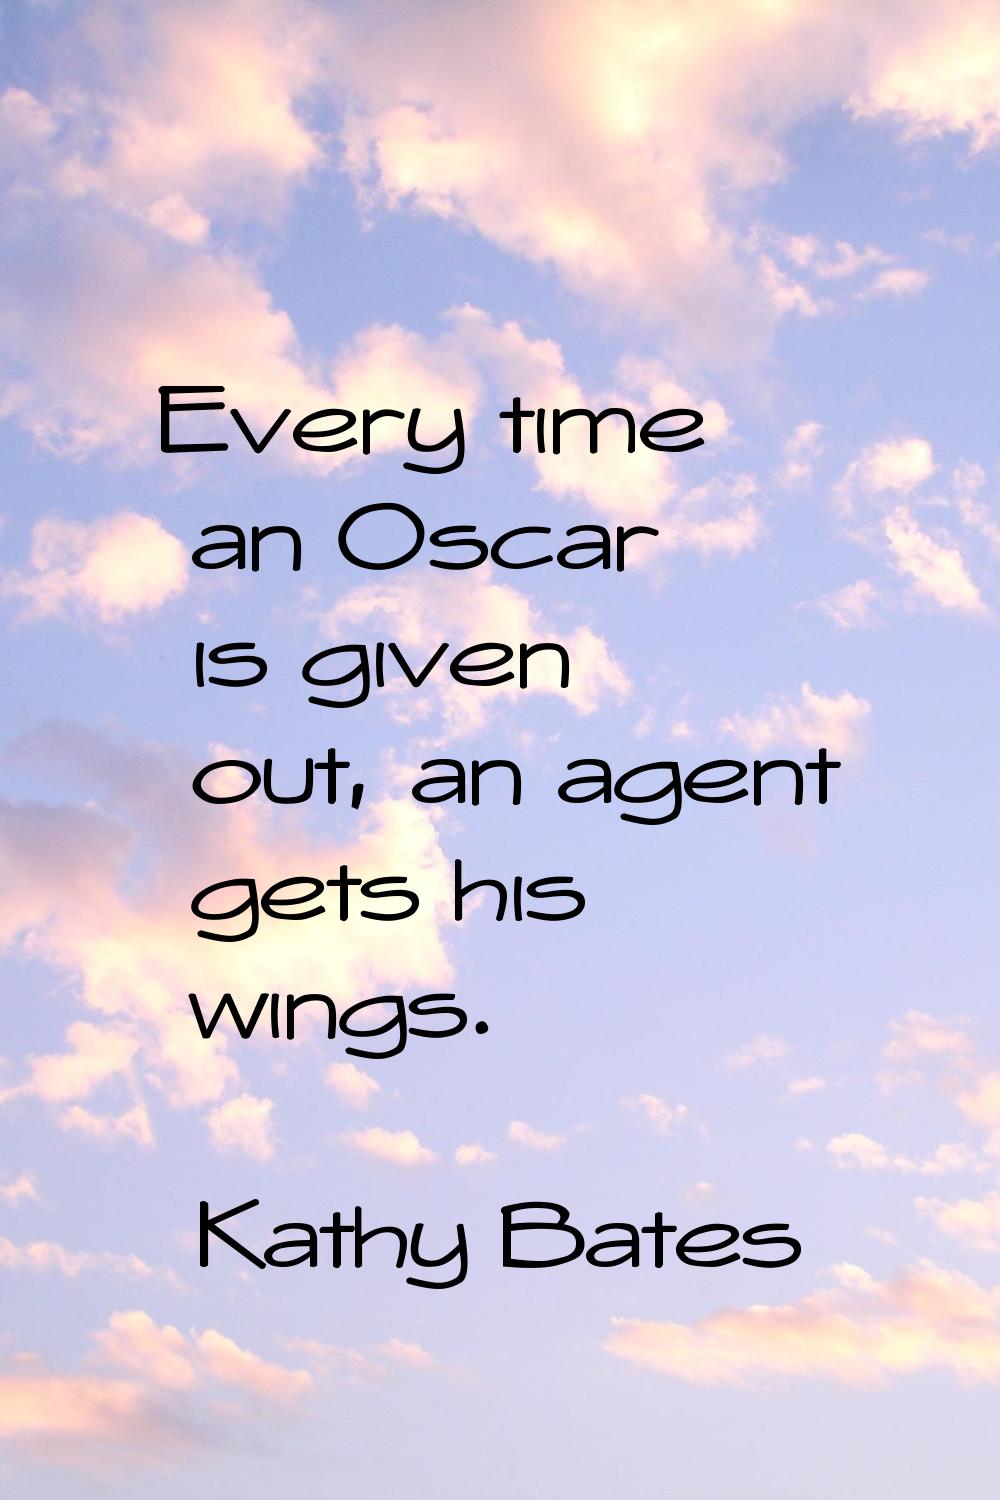 Every time an Oscar is given out, an agent gets his wings.